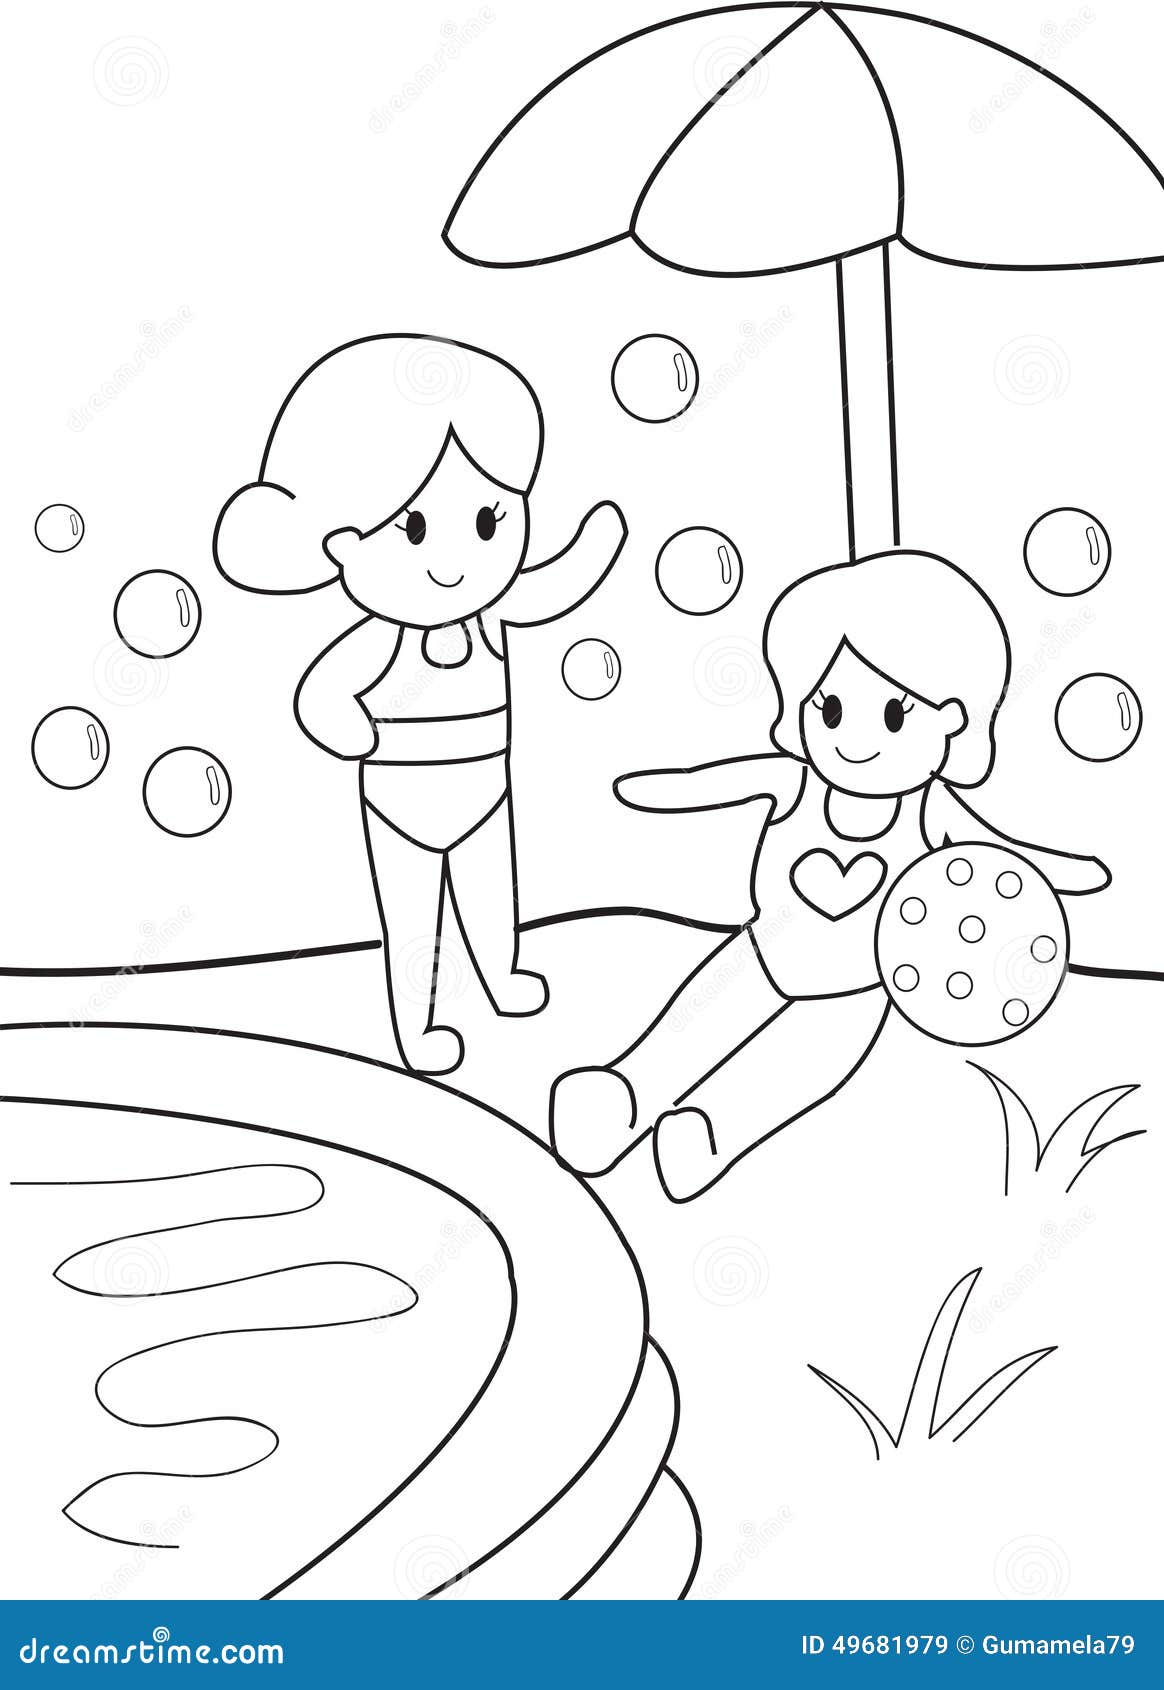 Girls By The Pool, Kid Coloring Page Illustration 25 - Megapixl